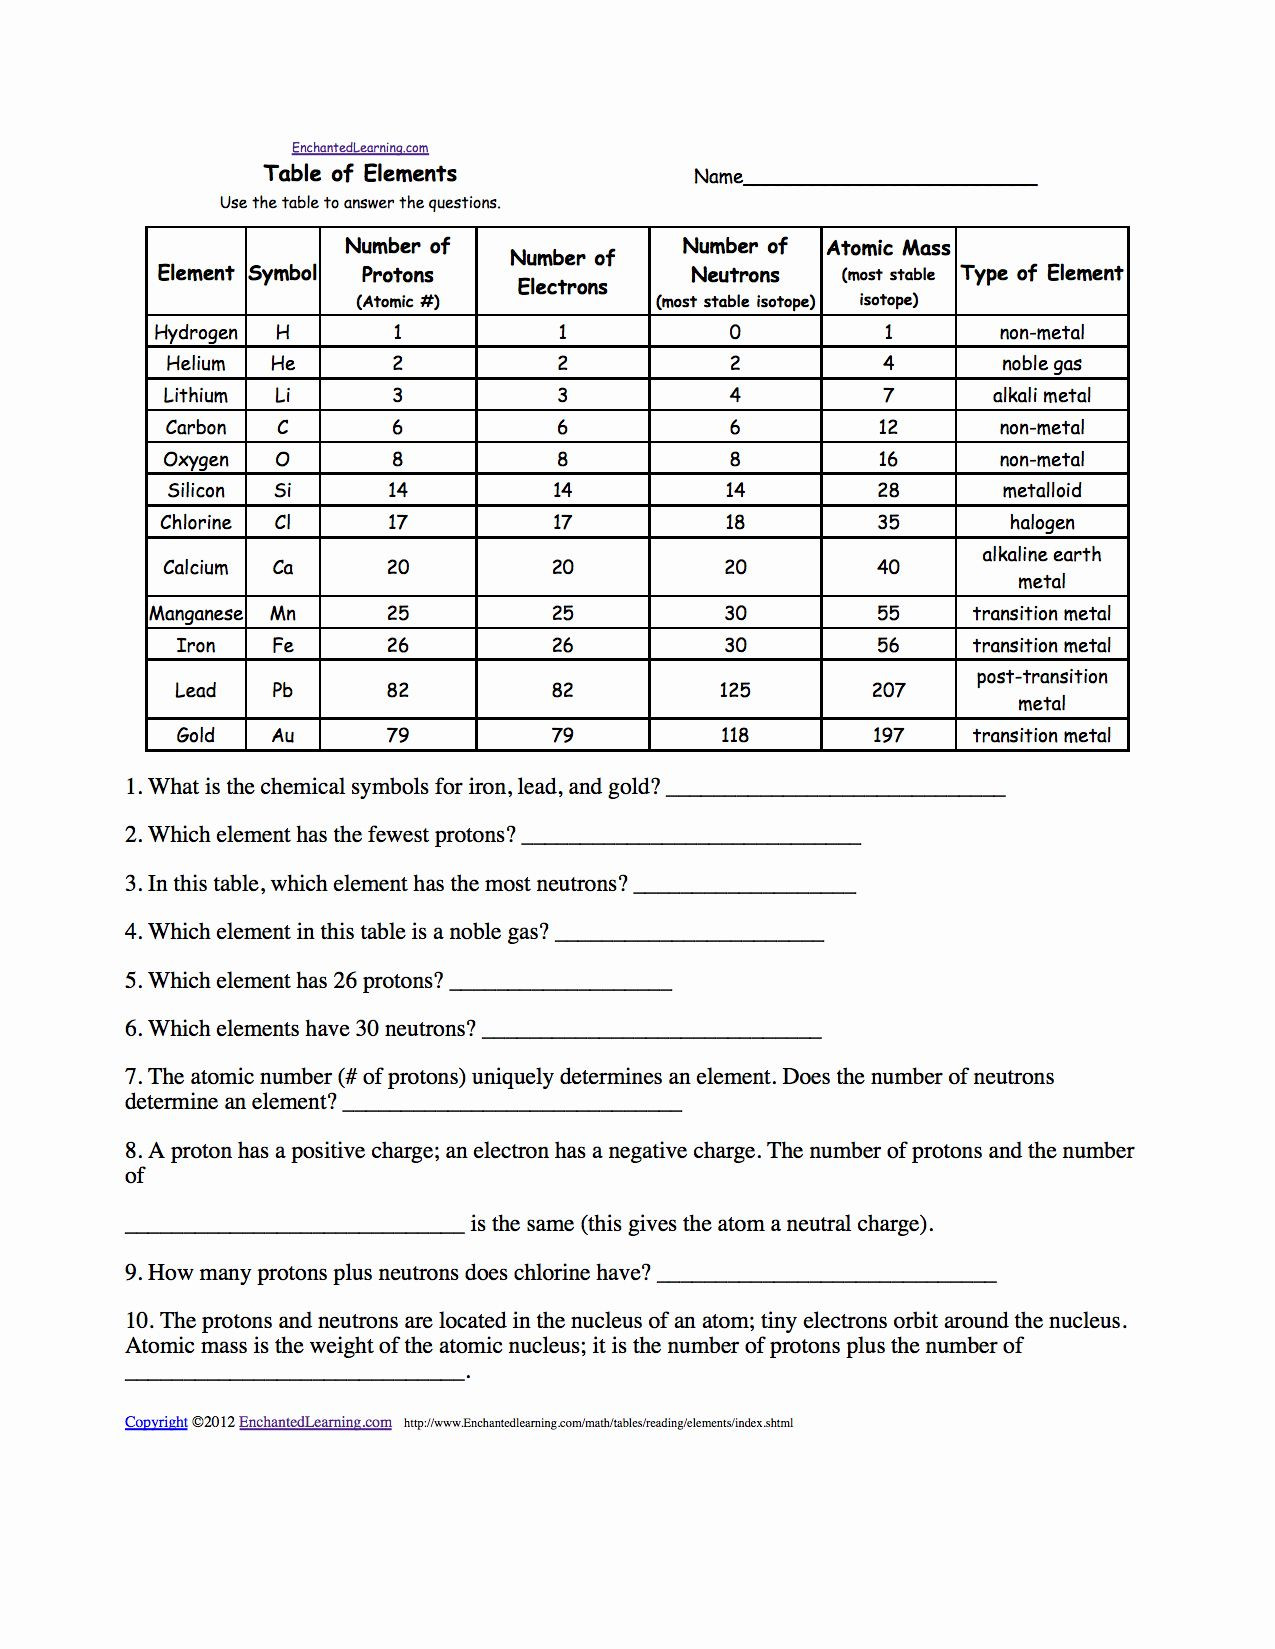 Atoms and isotopes Worksheet Answers 50 isotope Practice Worksheet Answer Key 2020